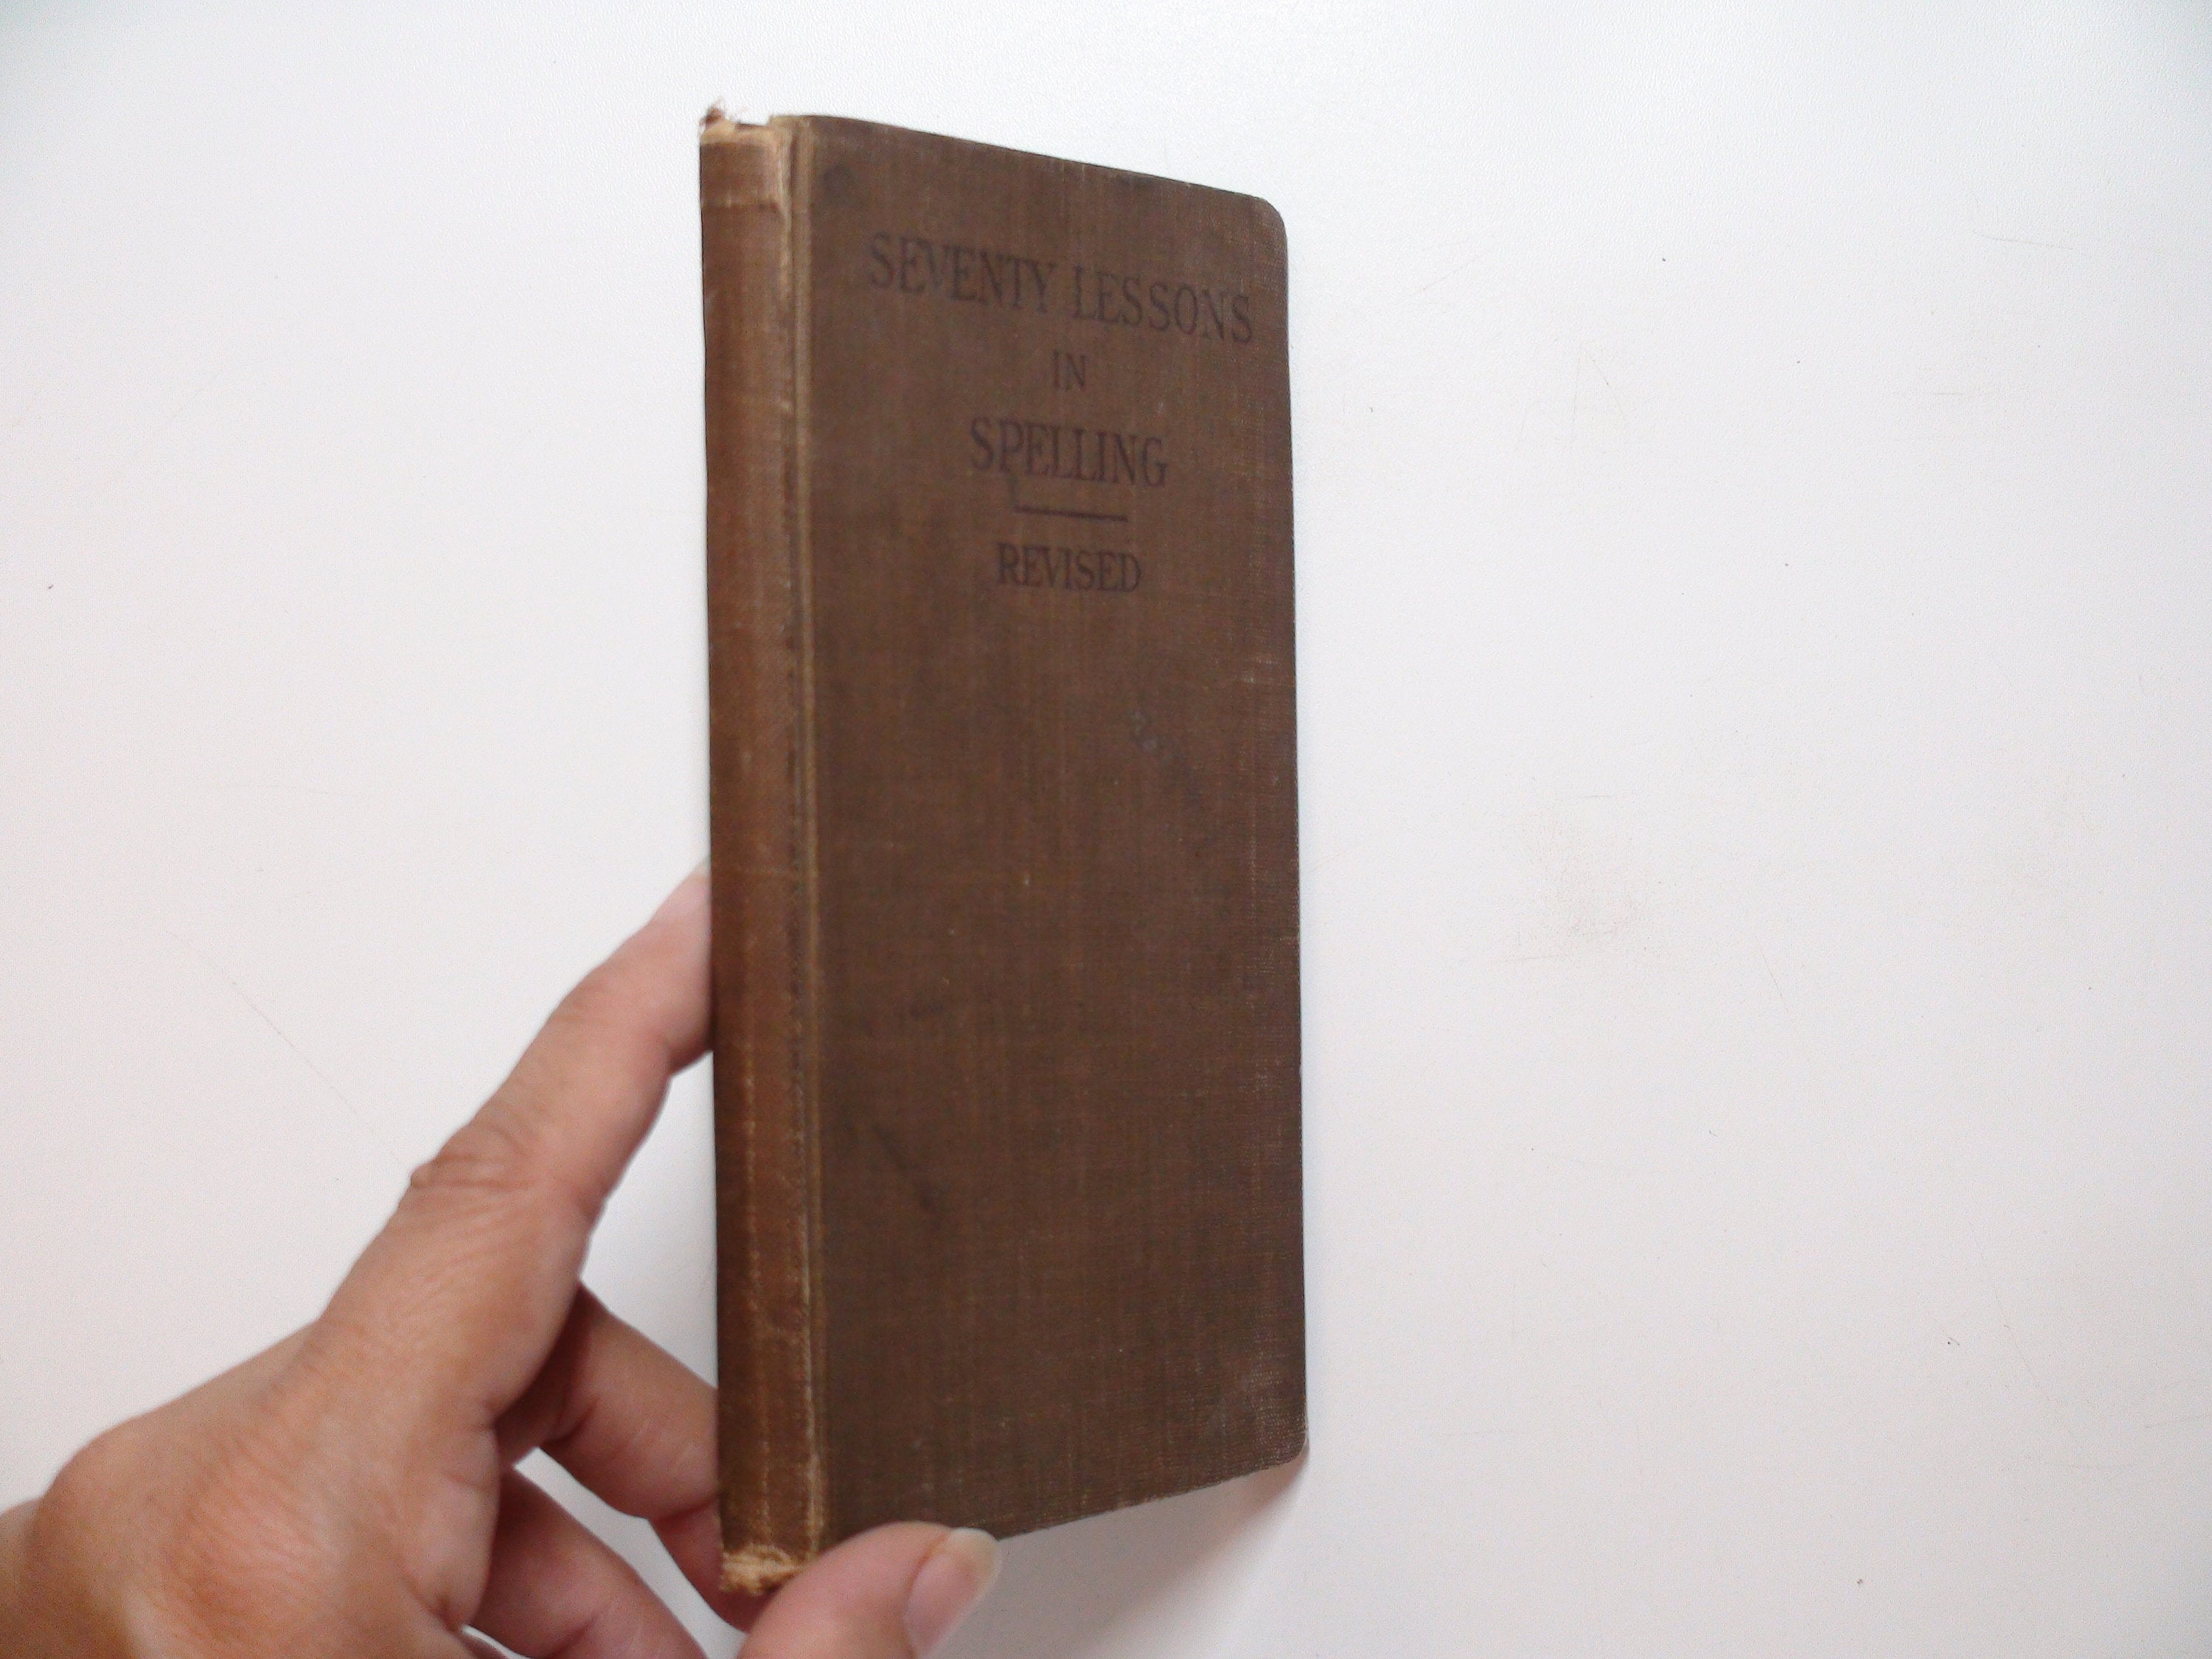 Williams & Rogers Series, Seventy Lessons in Spelling, Revised, 1906